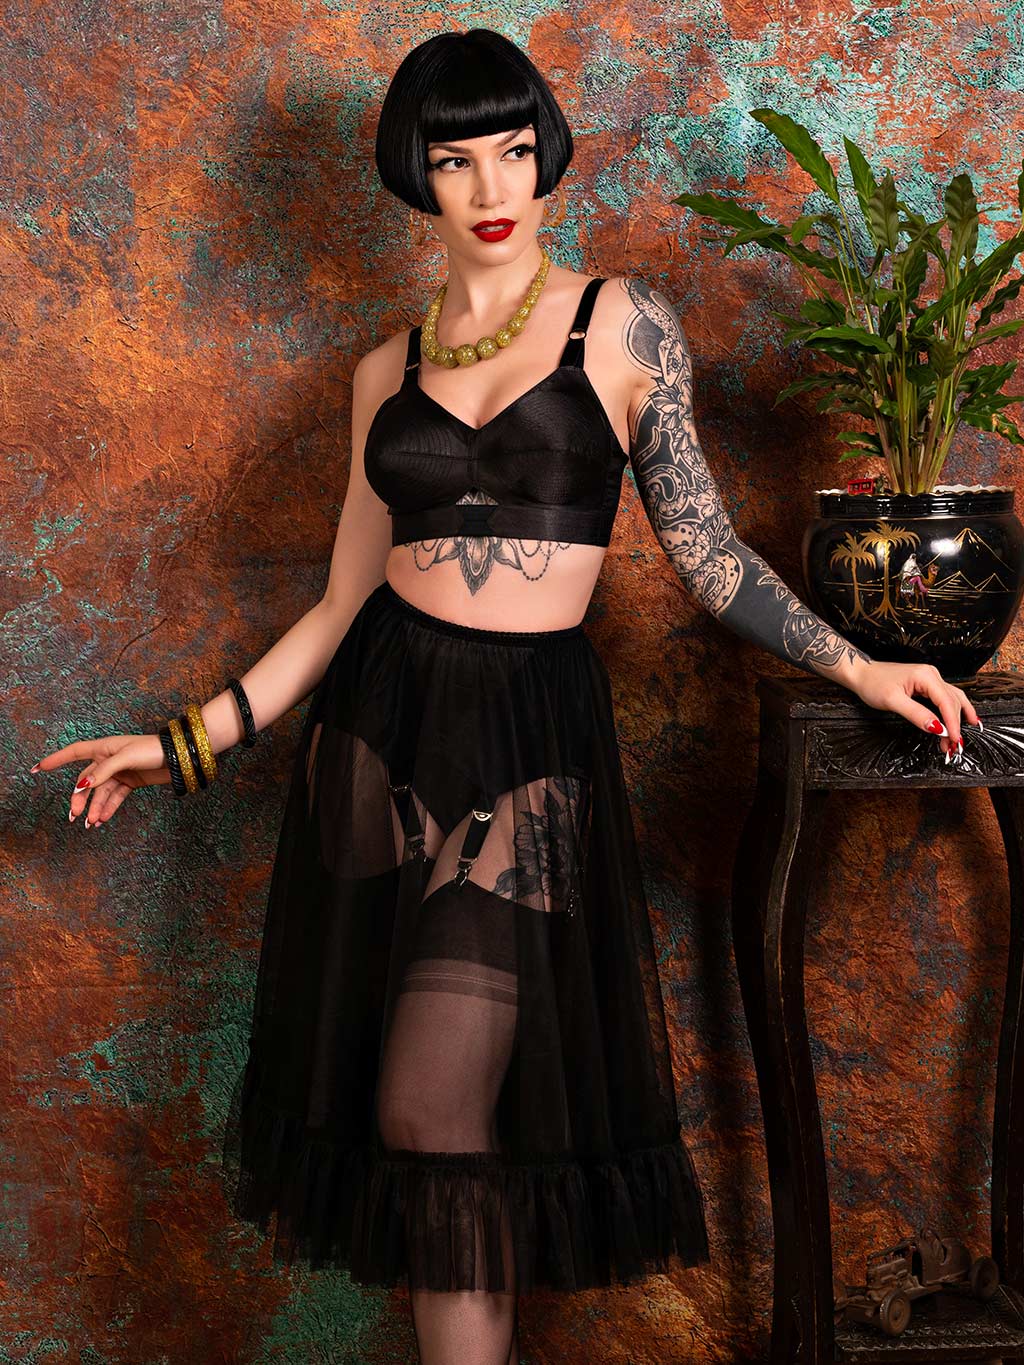 black frilly petticoat in 100% nylon, worn with 1950s satin bullet bra and black stockings